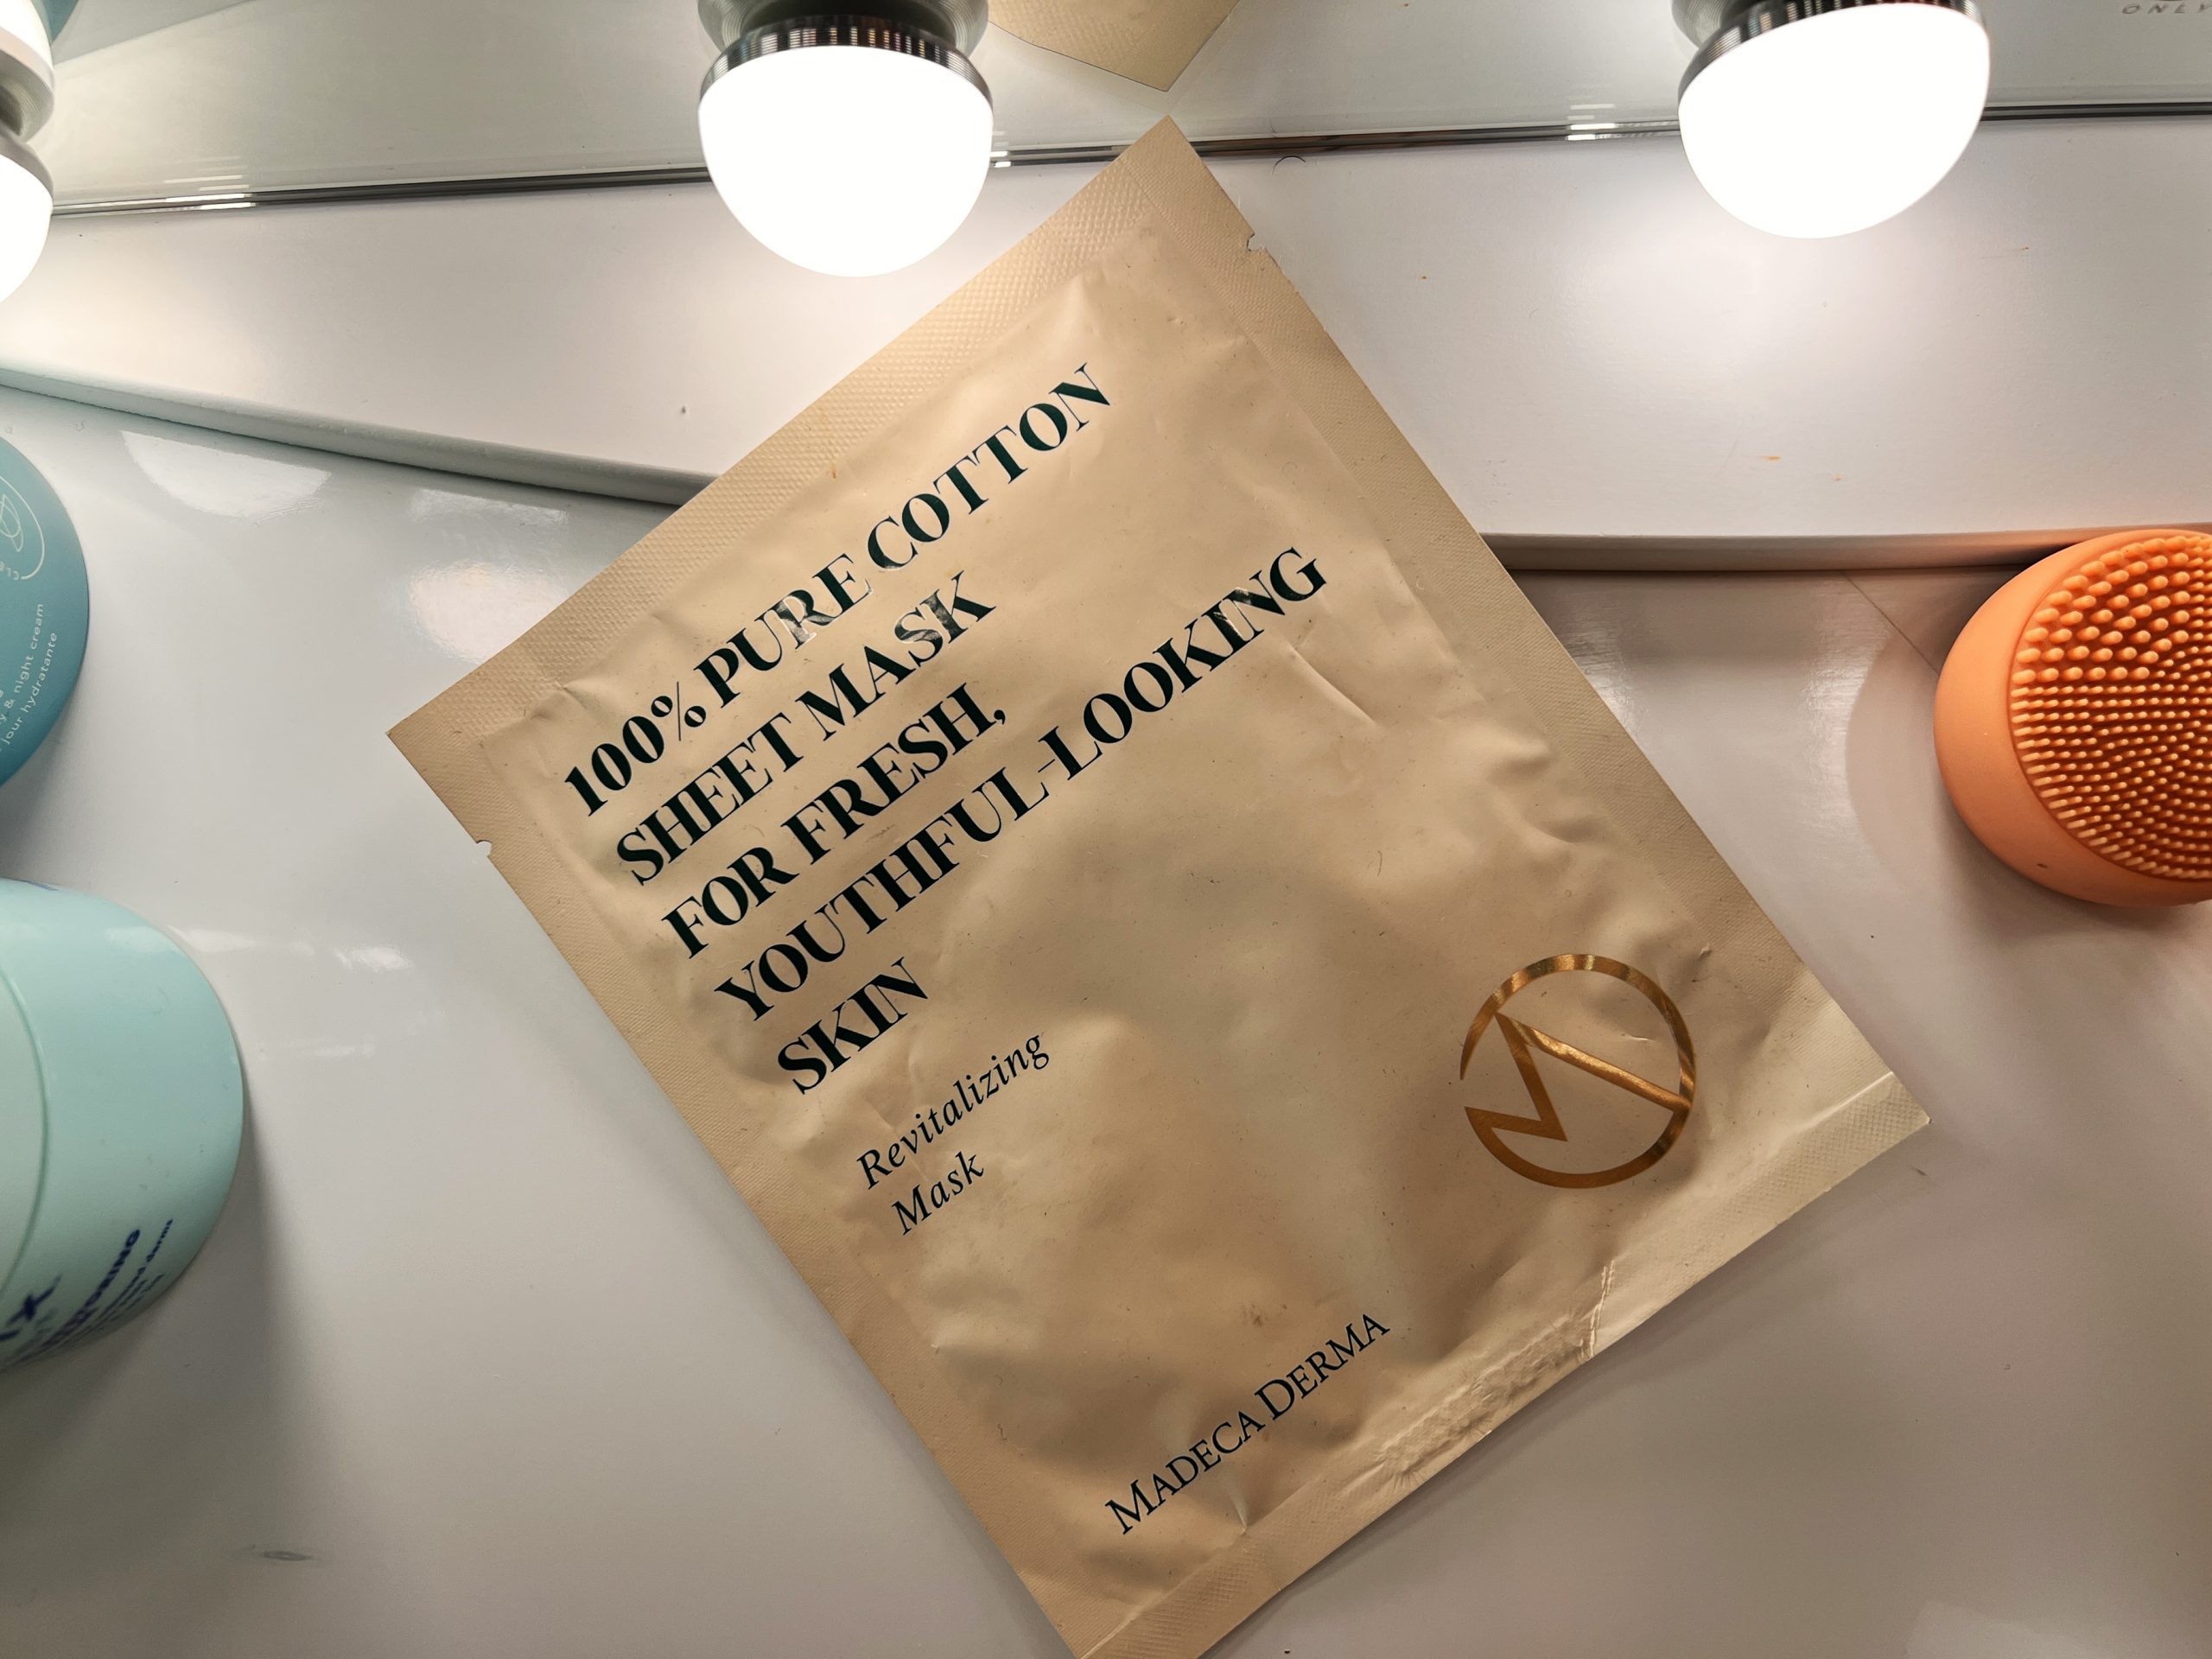 Revitalized and renewed: My Honest Review of the Madeca Derma Sheet Mask